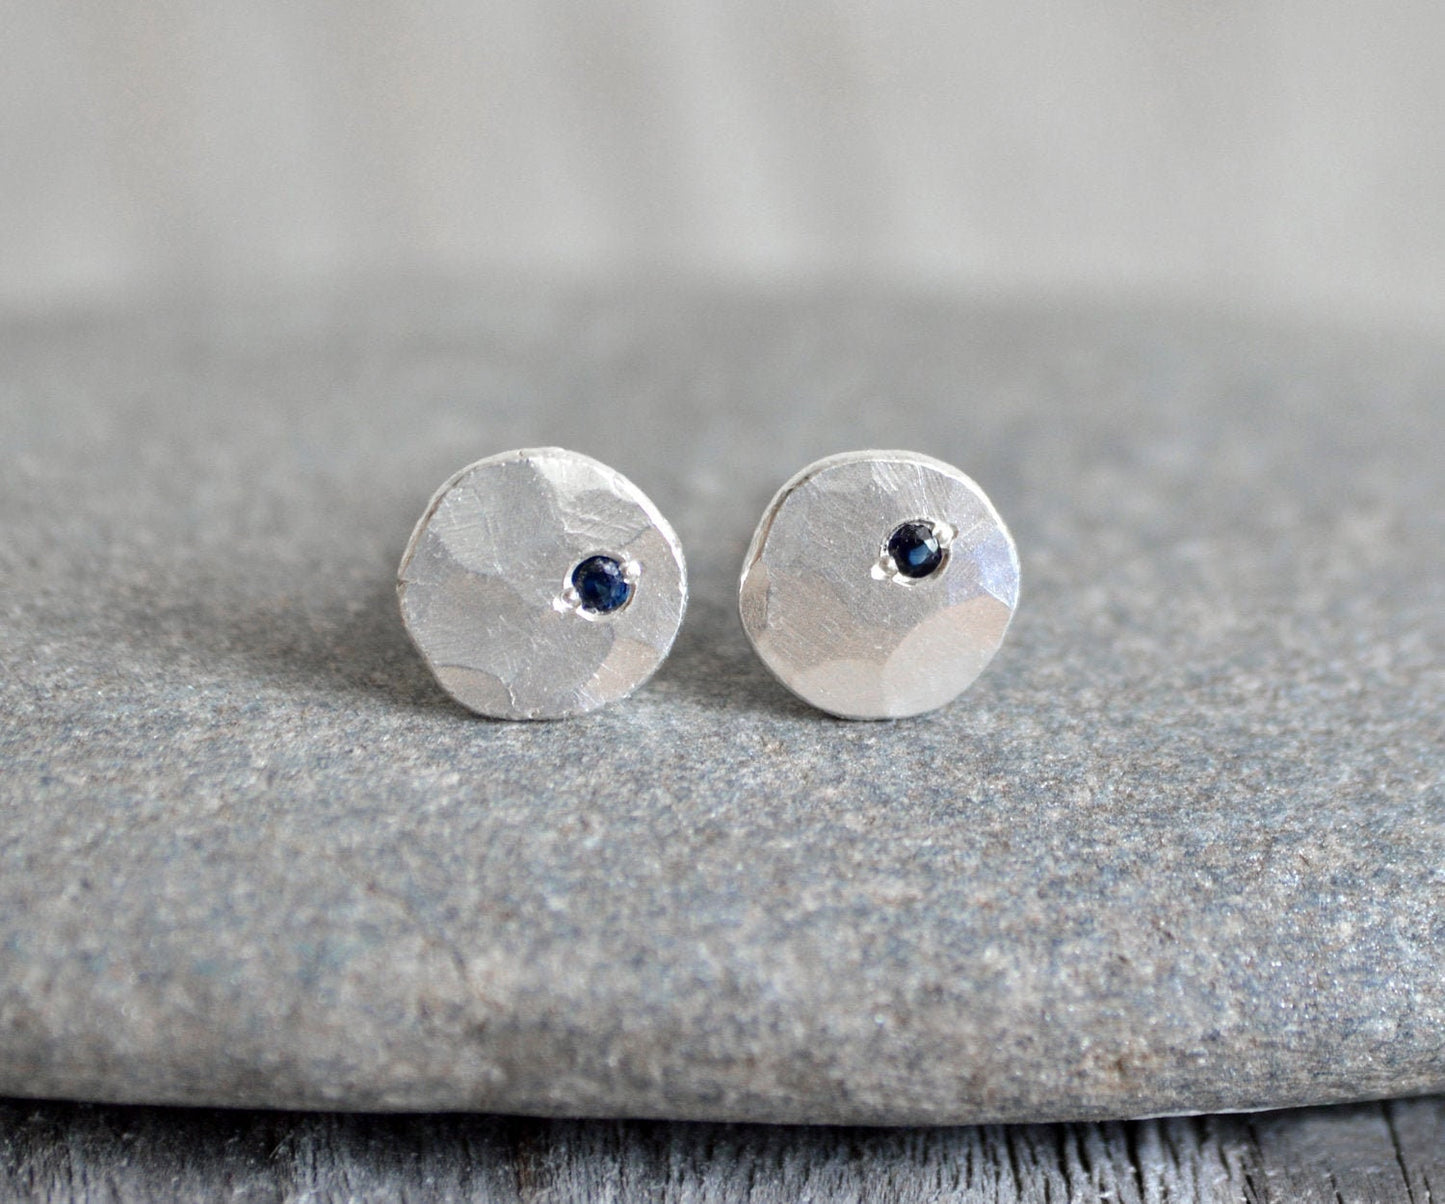 Rustic Stud Earrings with Sapphires, Small Sapphires Ear Posts